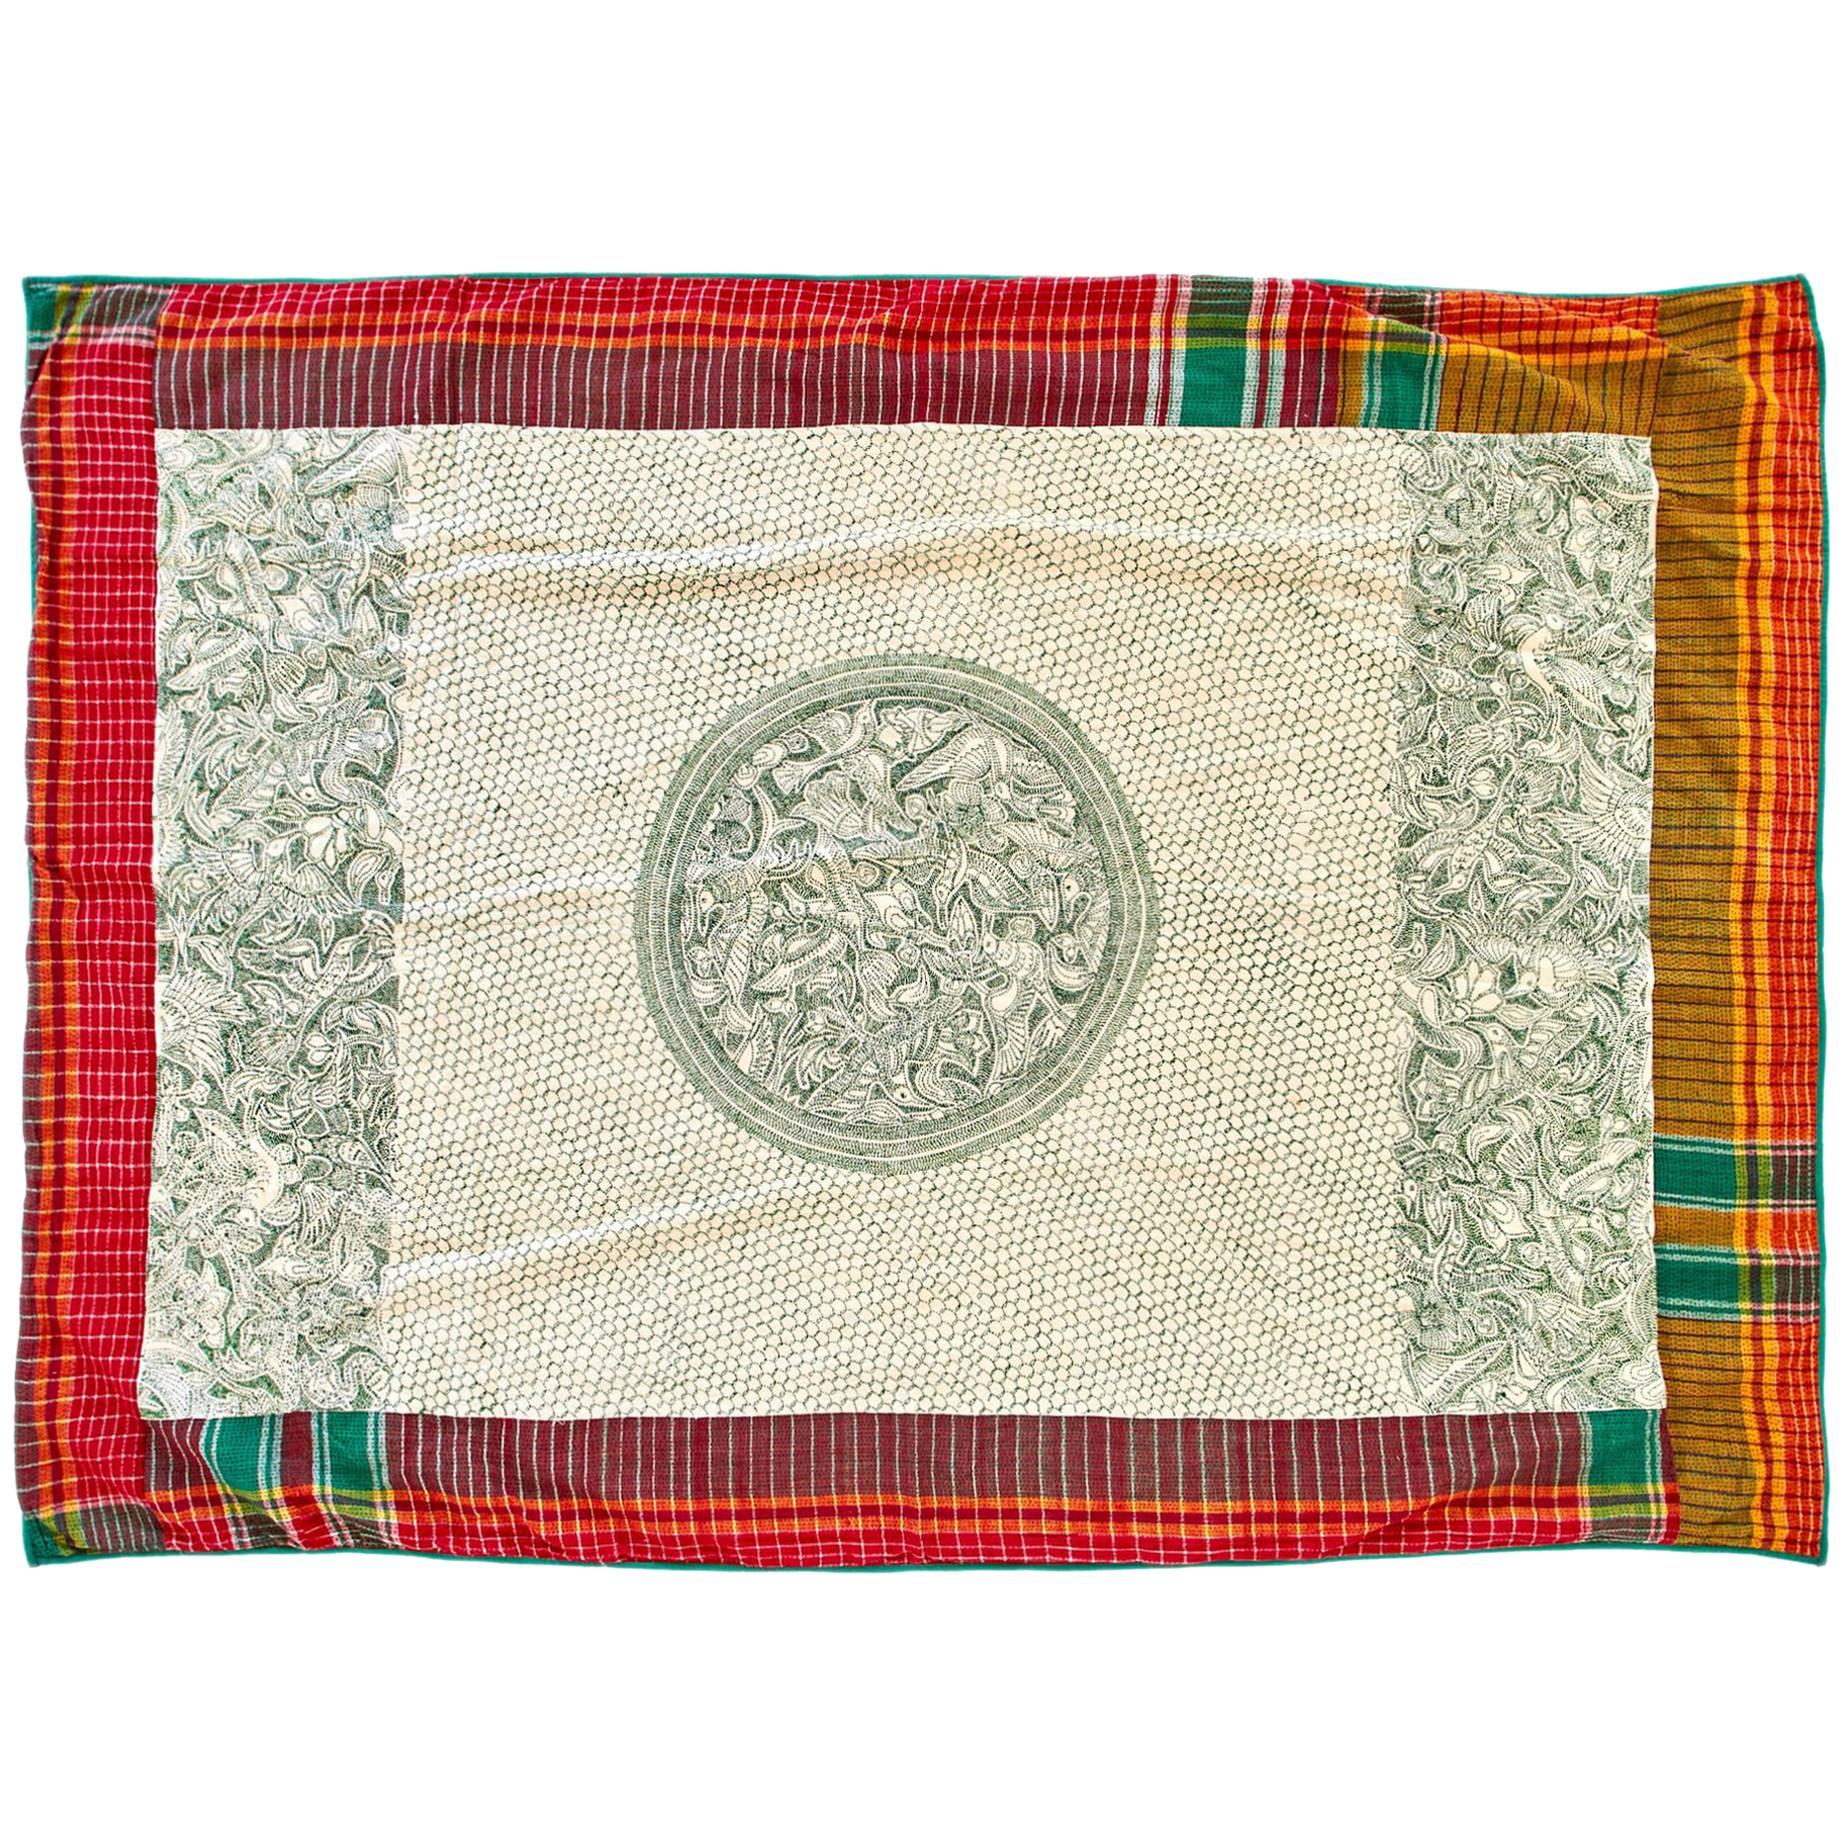 Rare Hand-Stitched Tribal Kantha Throw Blanket For Sale